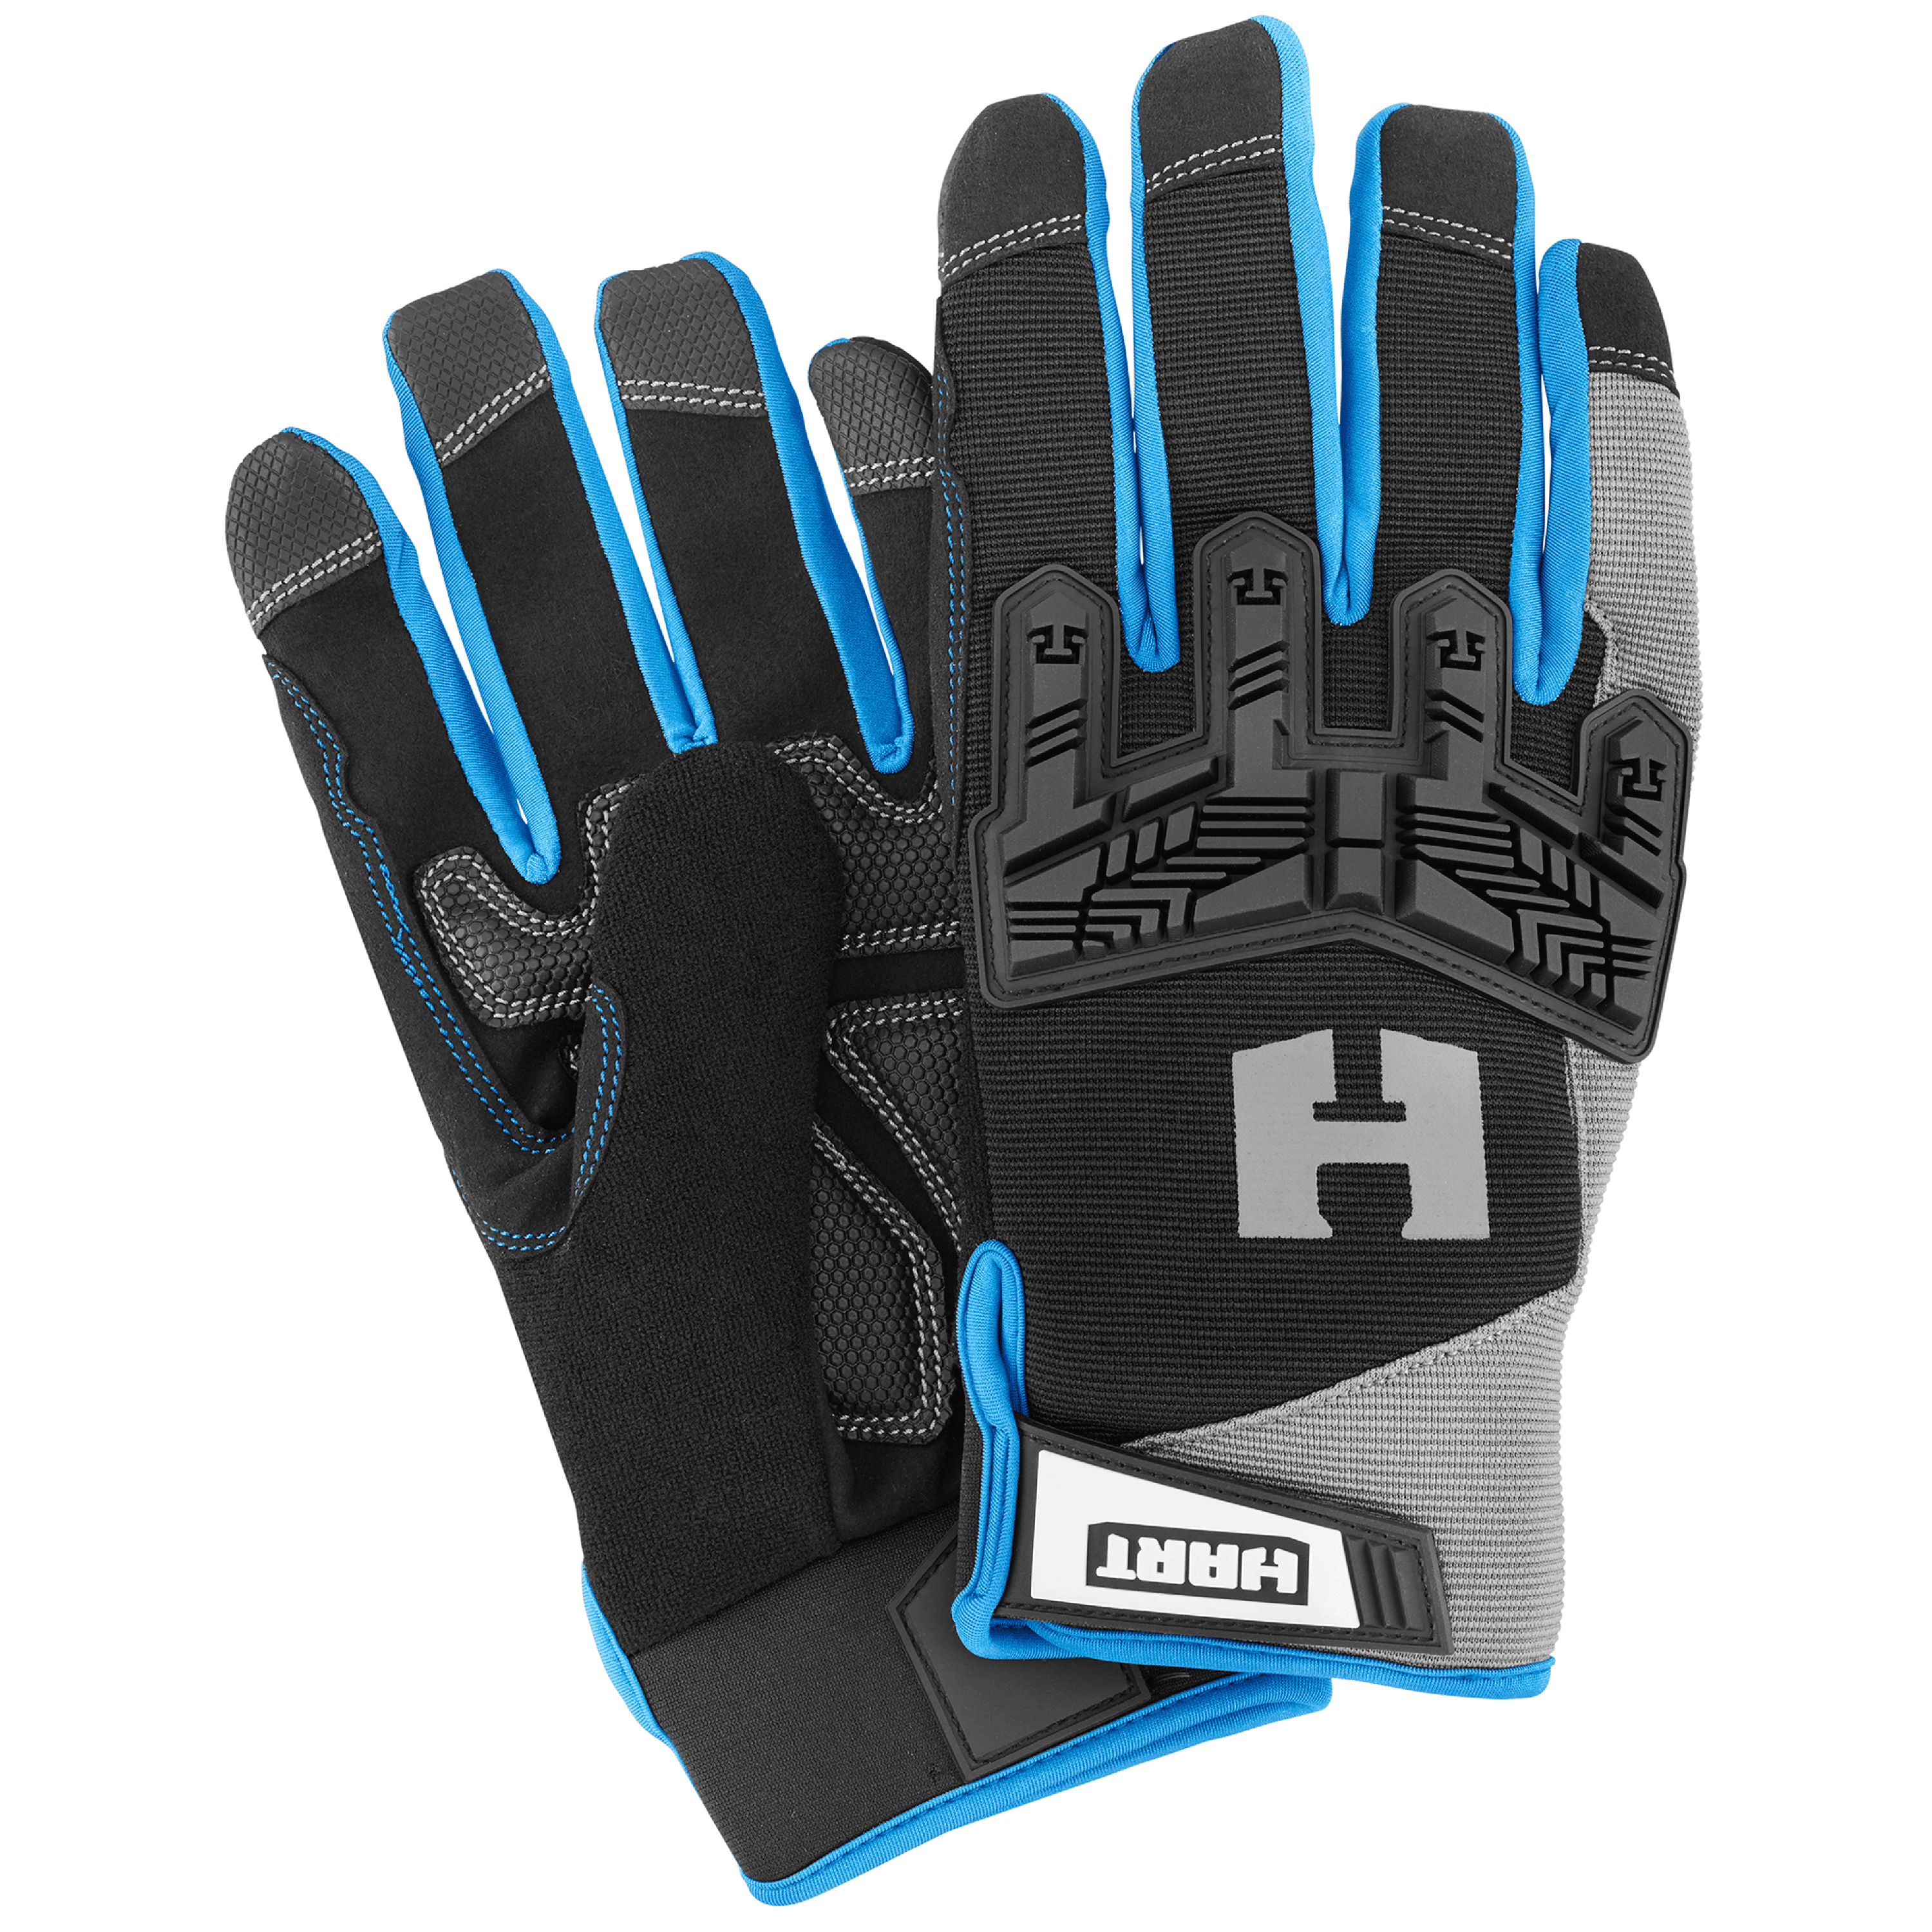 Hart Impact Work Gloves, 5-Finger Touchscreen Capable, Size Large Safety Workwear Gloves, Size: One Size hhppgd2